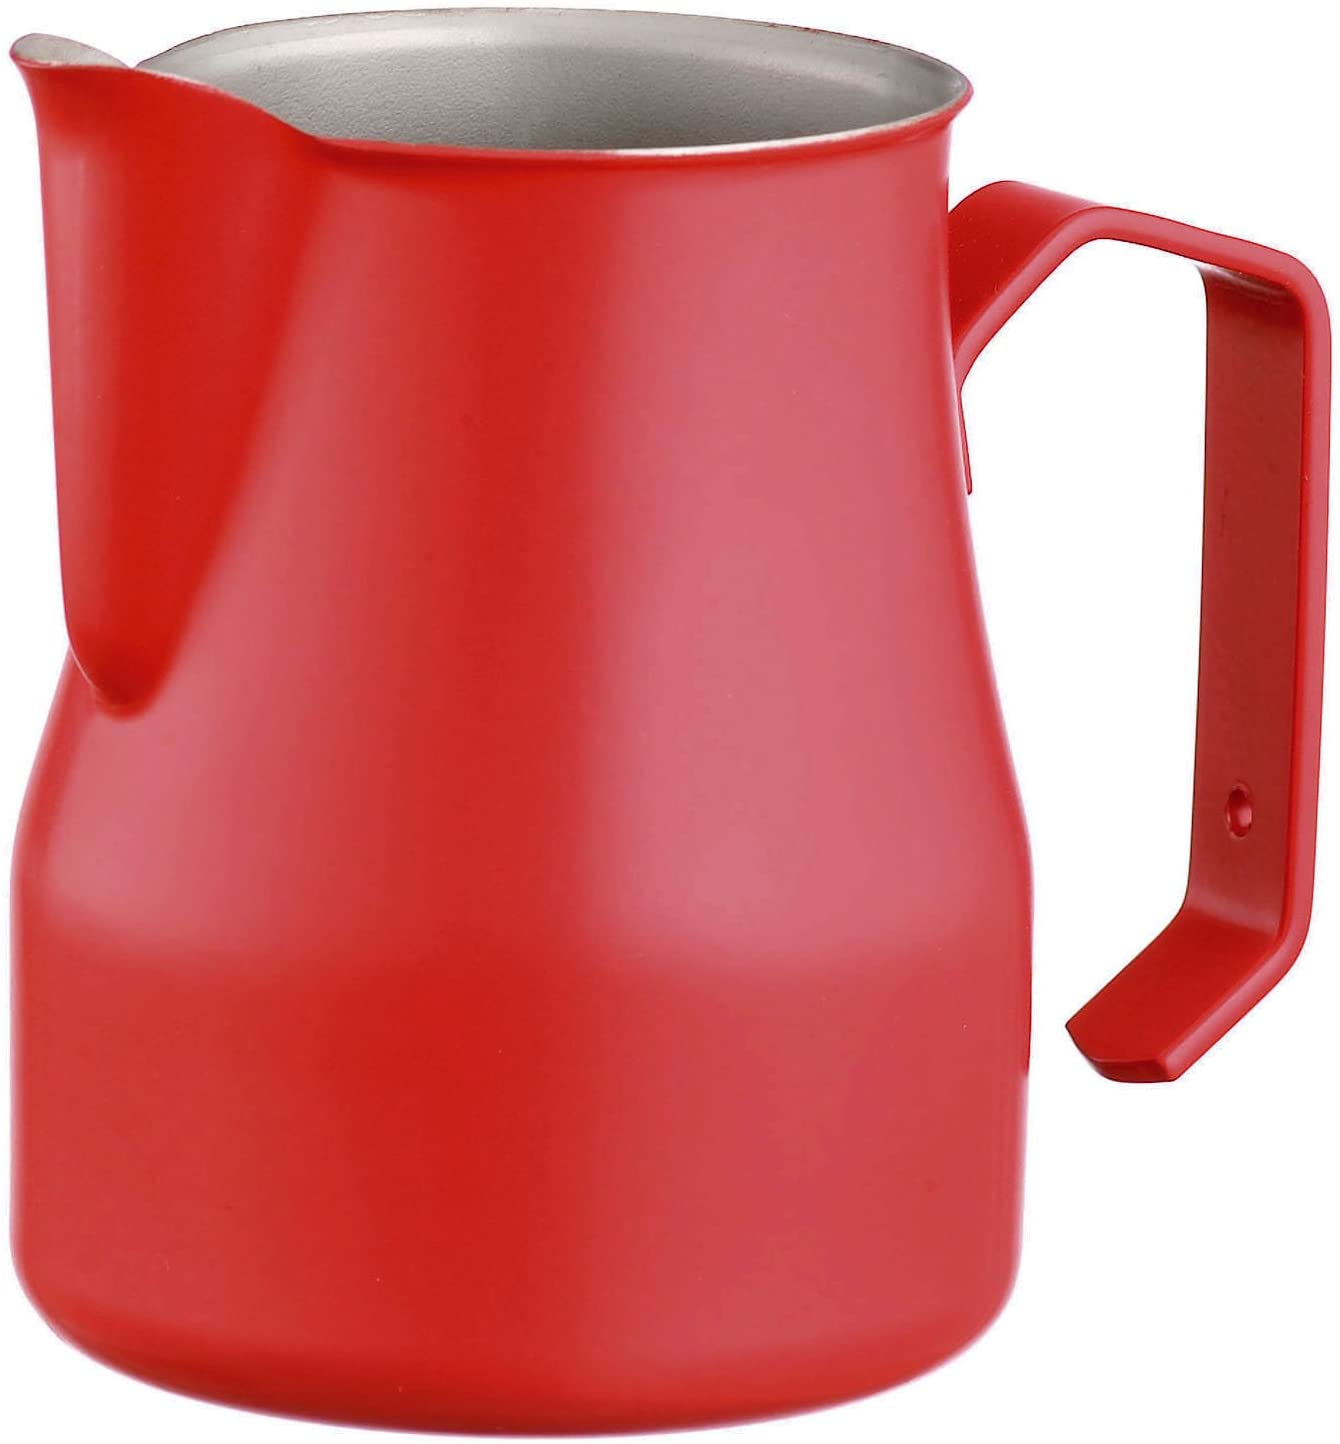 Motta 75cl Stainless Steel Professional Milk Pitcher, 25.4 Fluid Ounce, Red